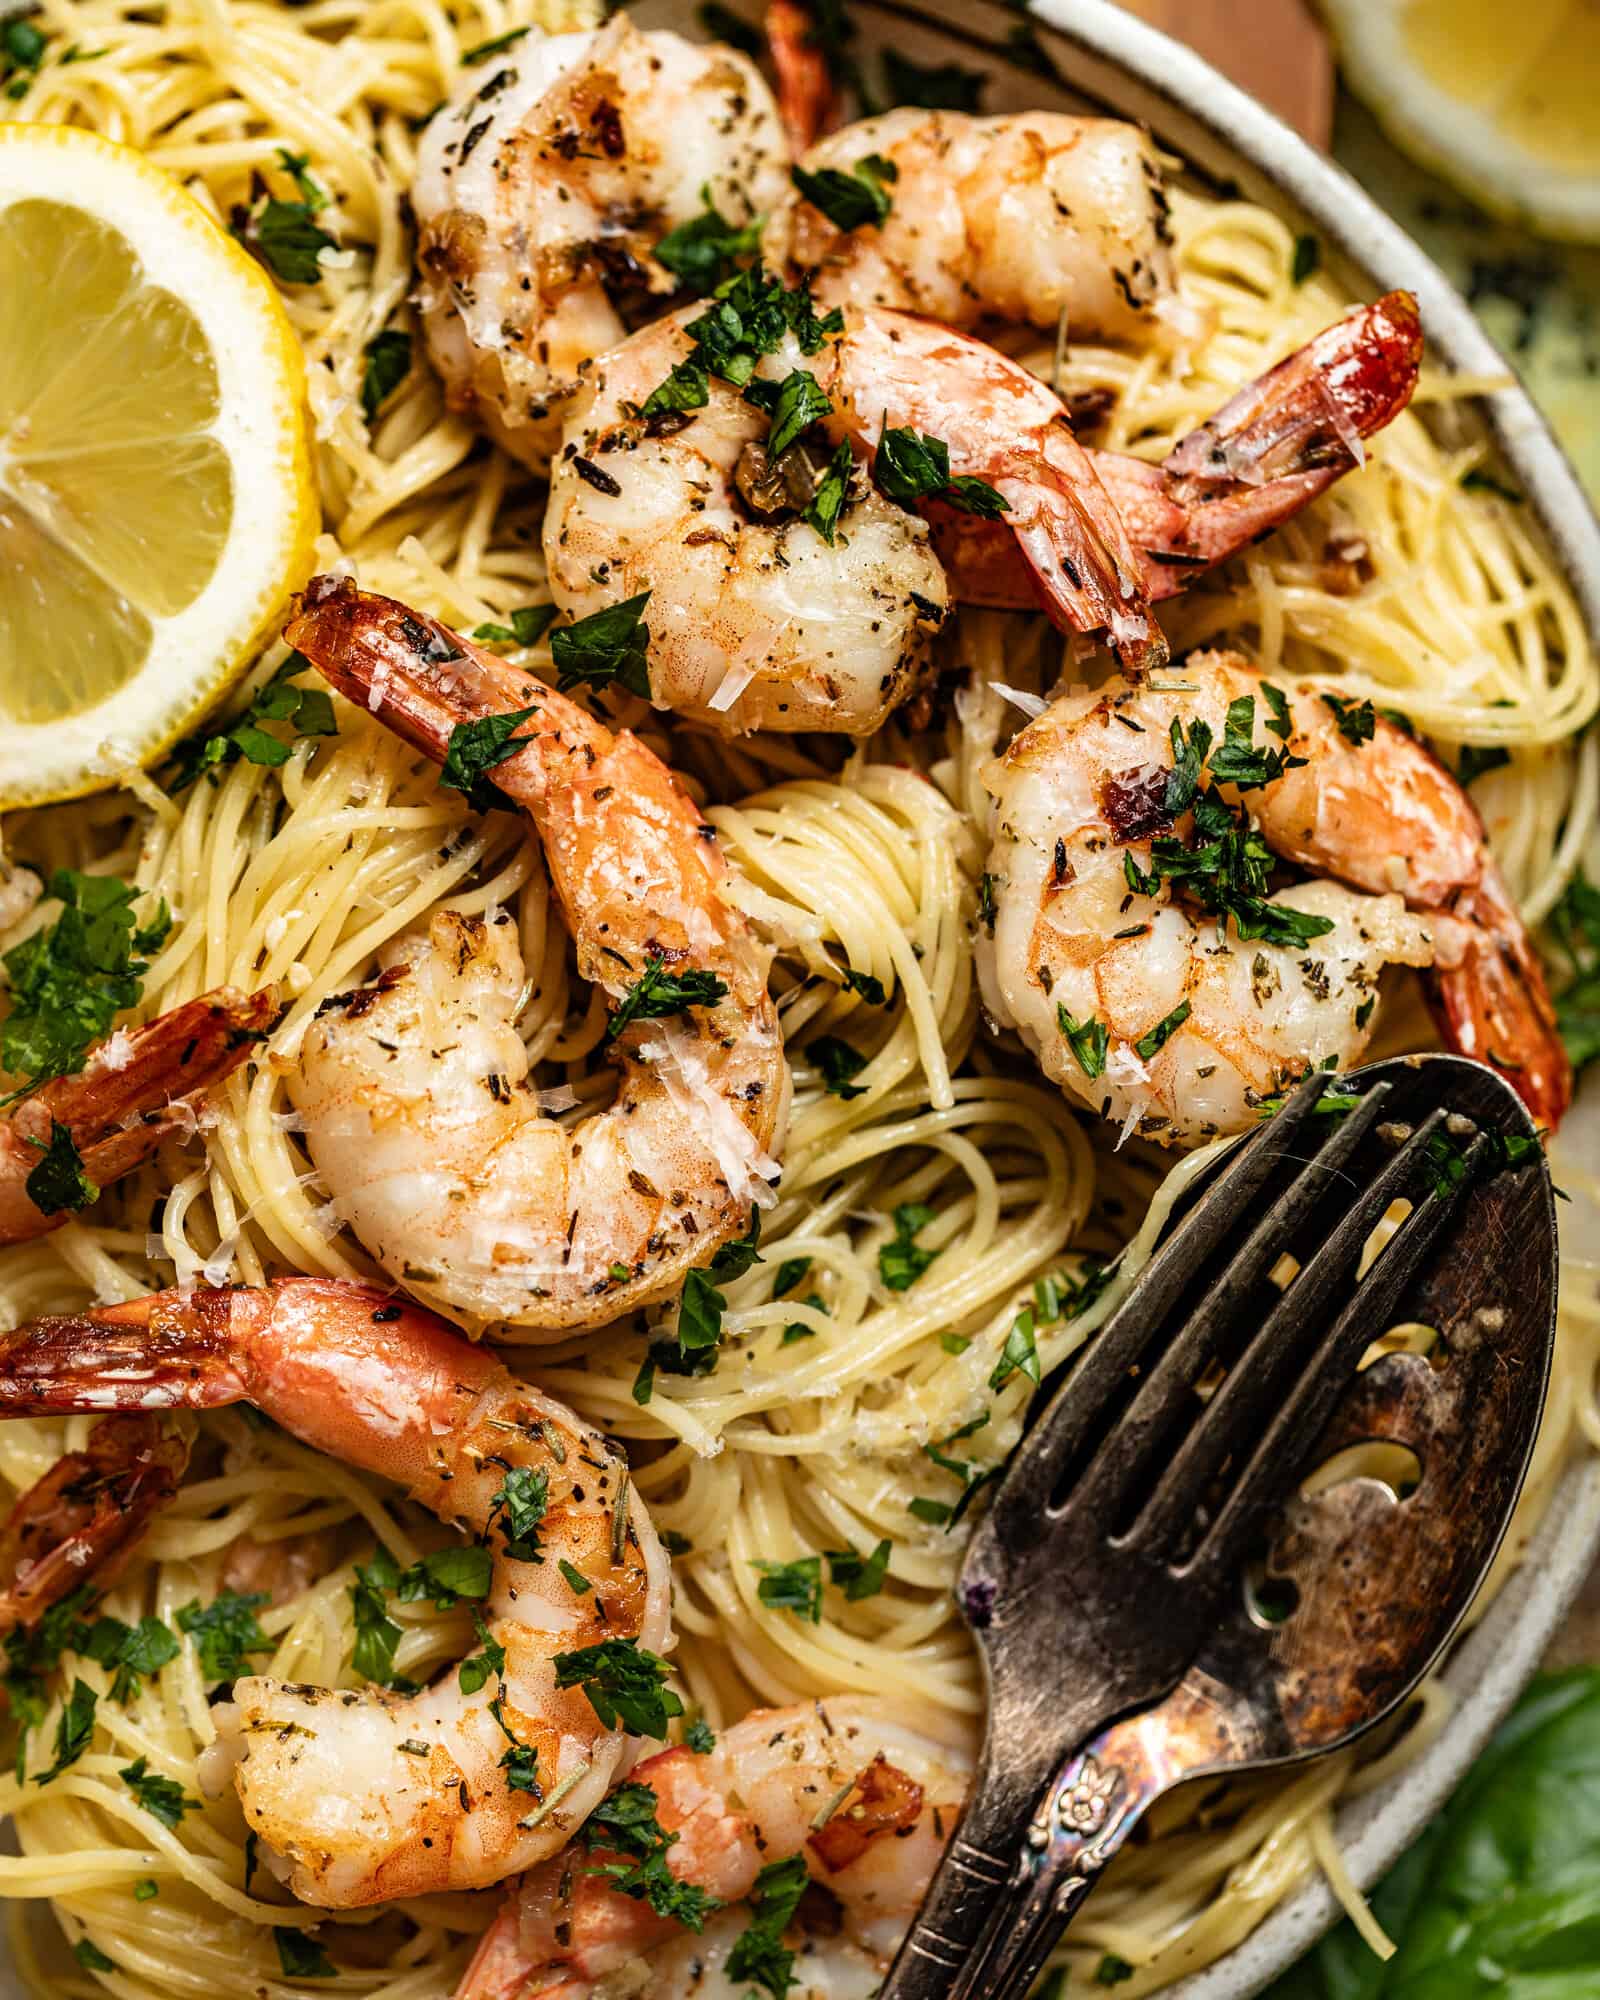 Shrimp scampi with lemon wedges over pasta and fresh parsley.